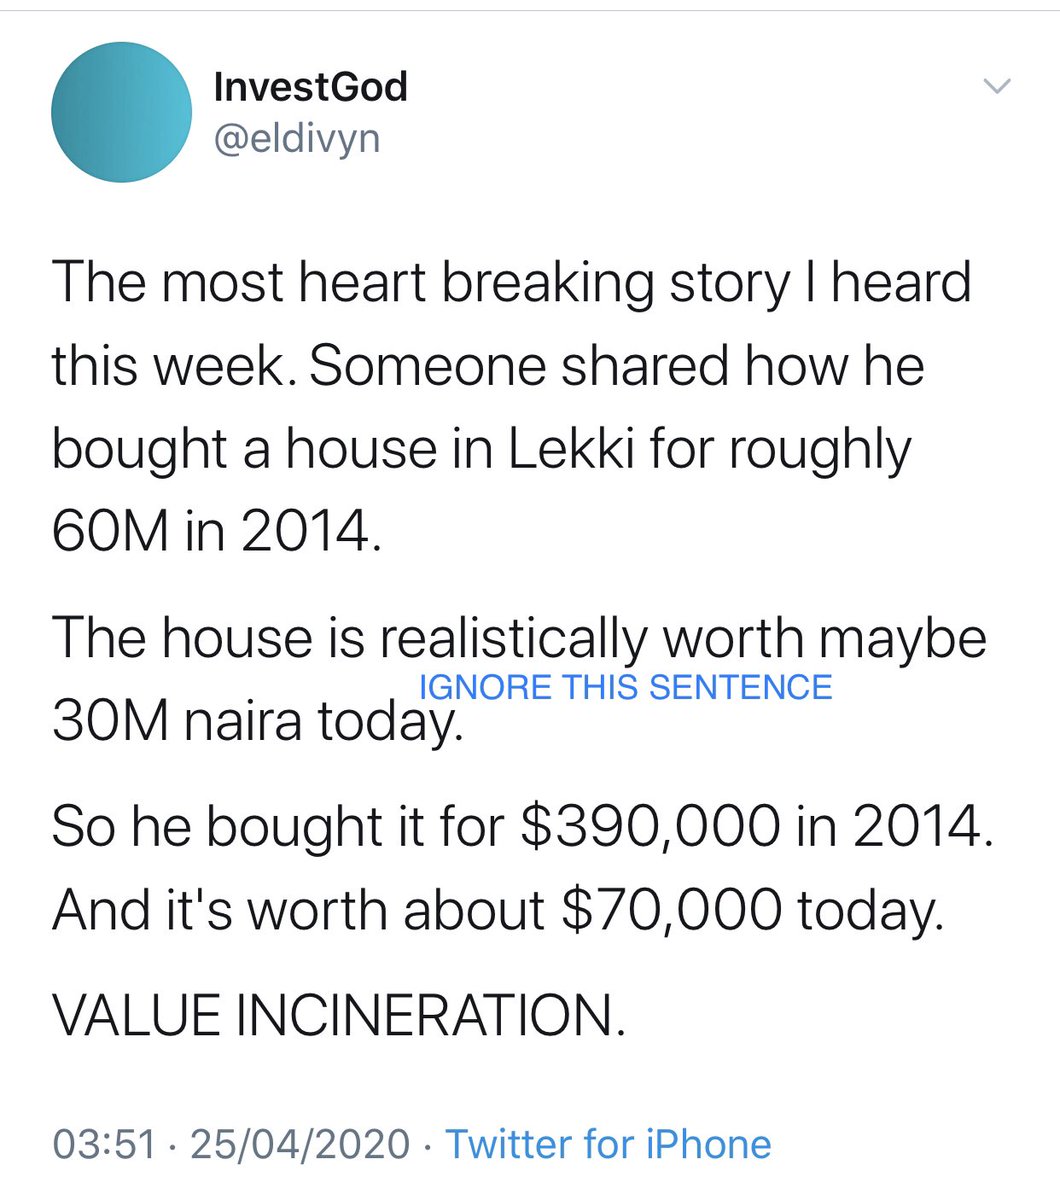 I will ignore the statement made by  @eldivyn regarding the worth of the house dropping from N60M to N30M in that story.  #ManagingWealth  #FxRisks  #WO 17/24Apart from this erroneous comment, all his other comments are logical 